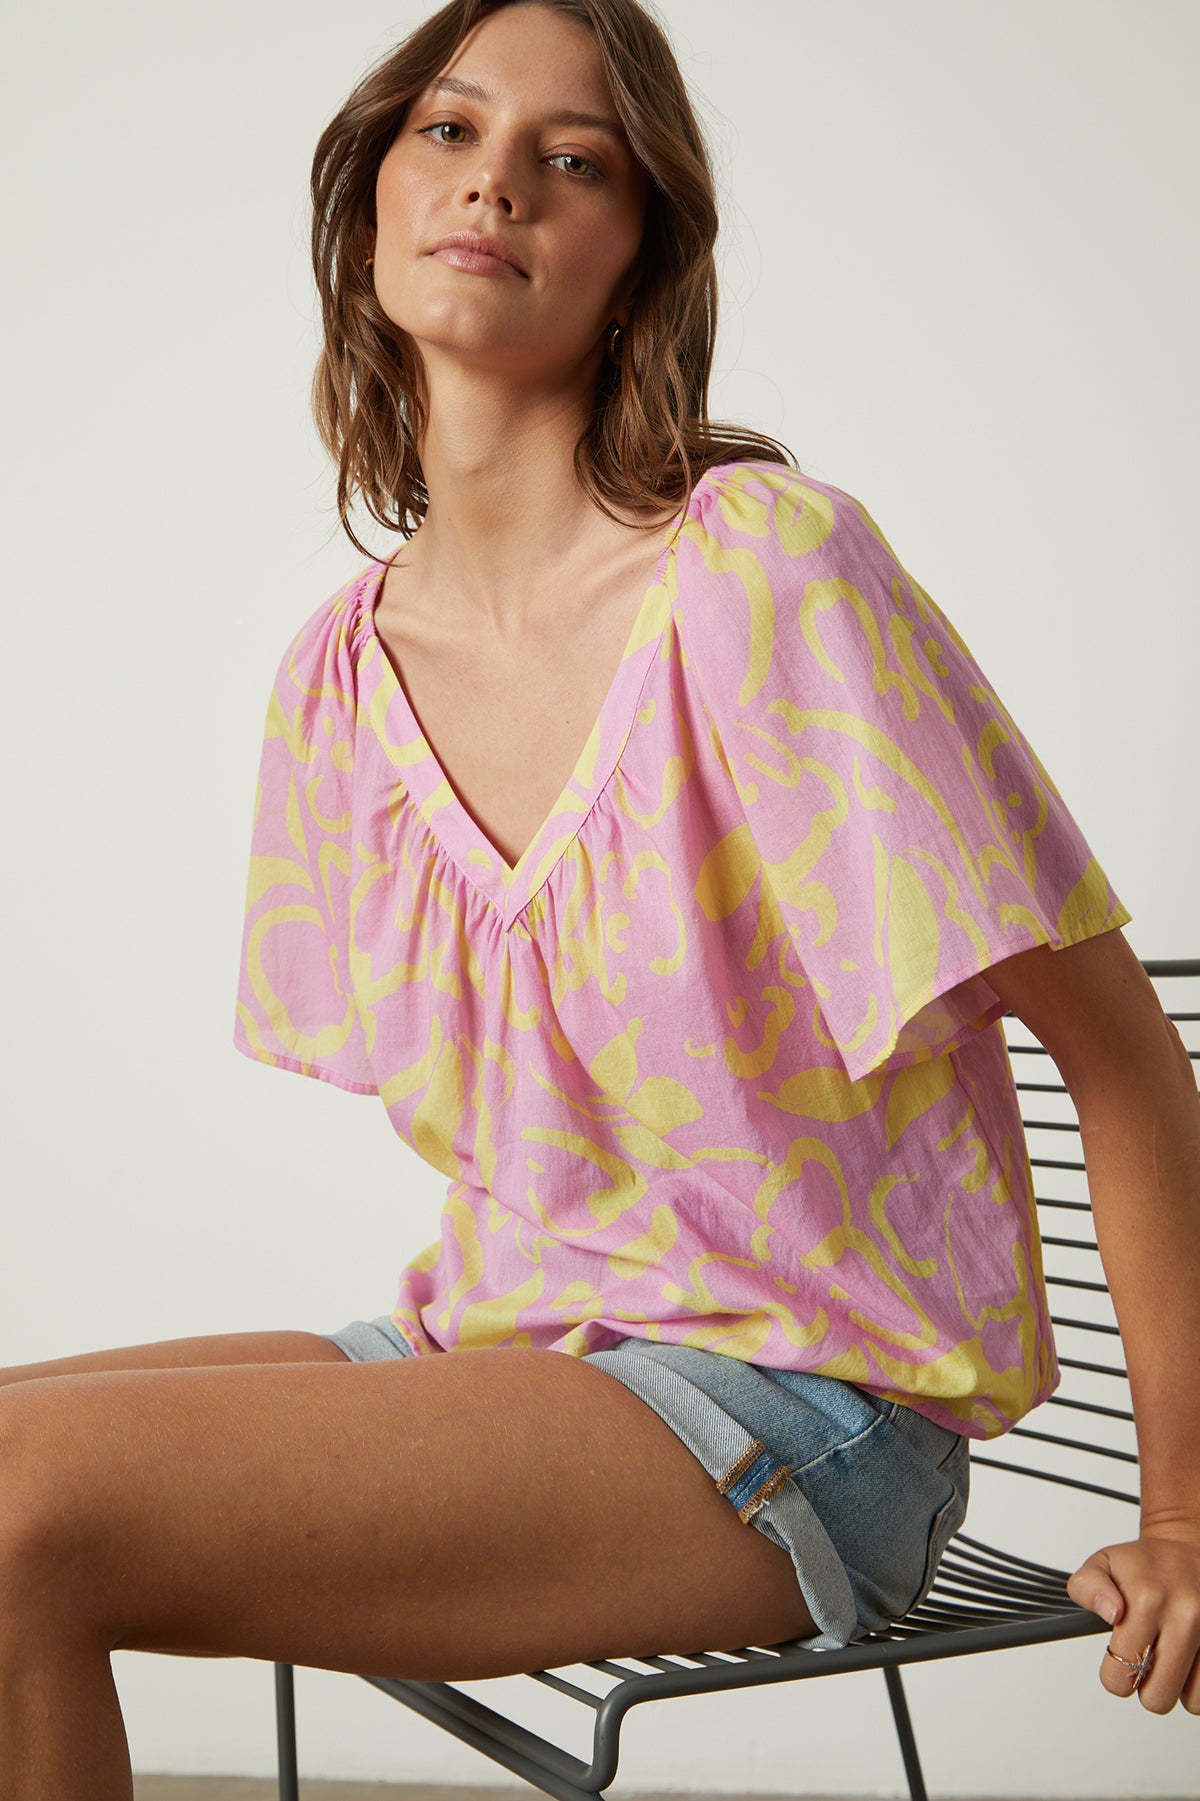 A woman is sitting on a chair wearing a Velvet by Graham & Spencer Liliana Printed V-Neck Top in pink and yellow.-25954331328705